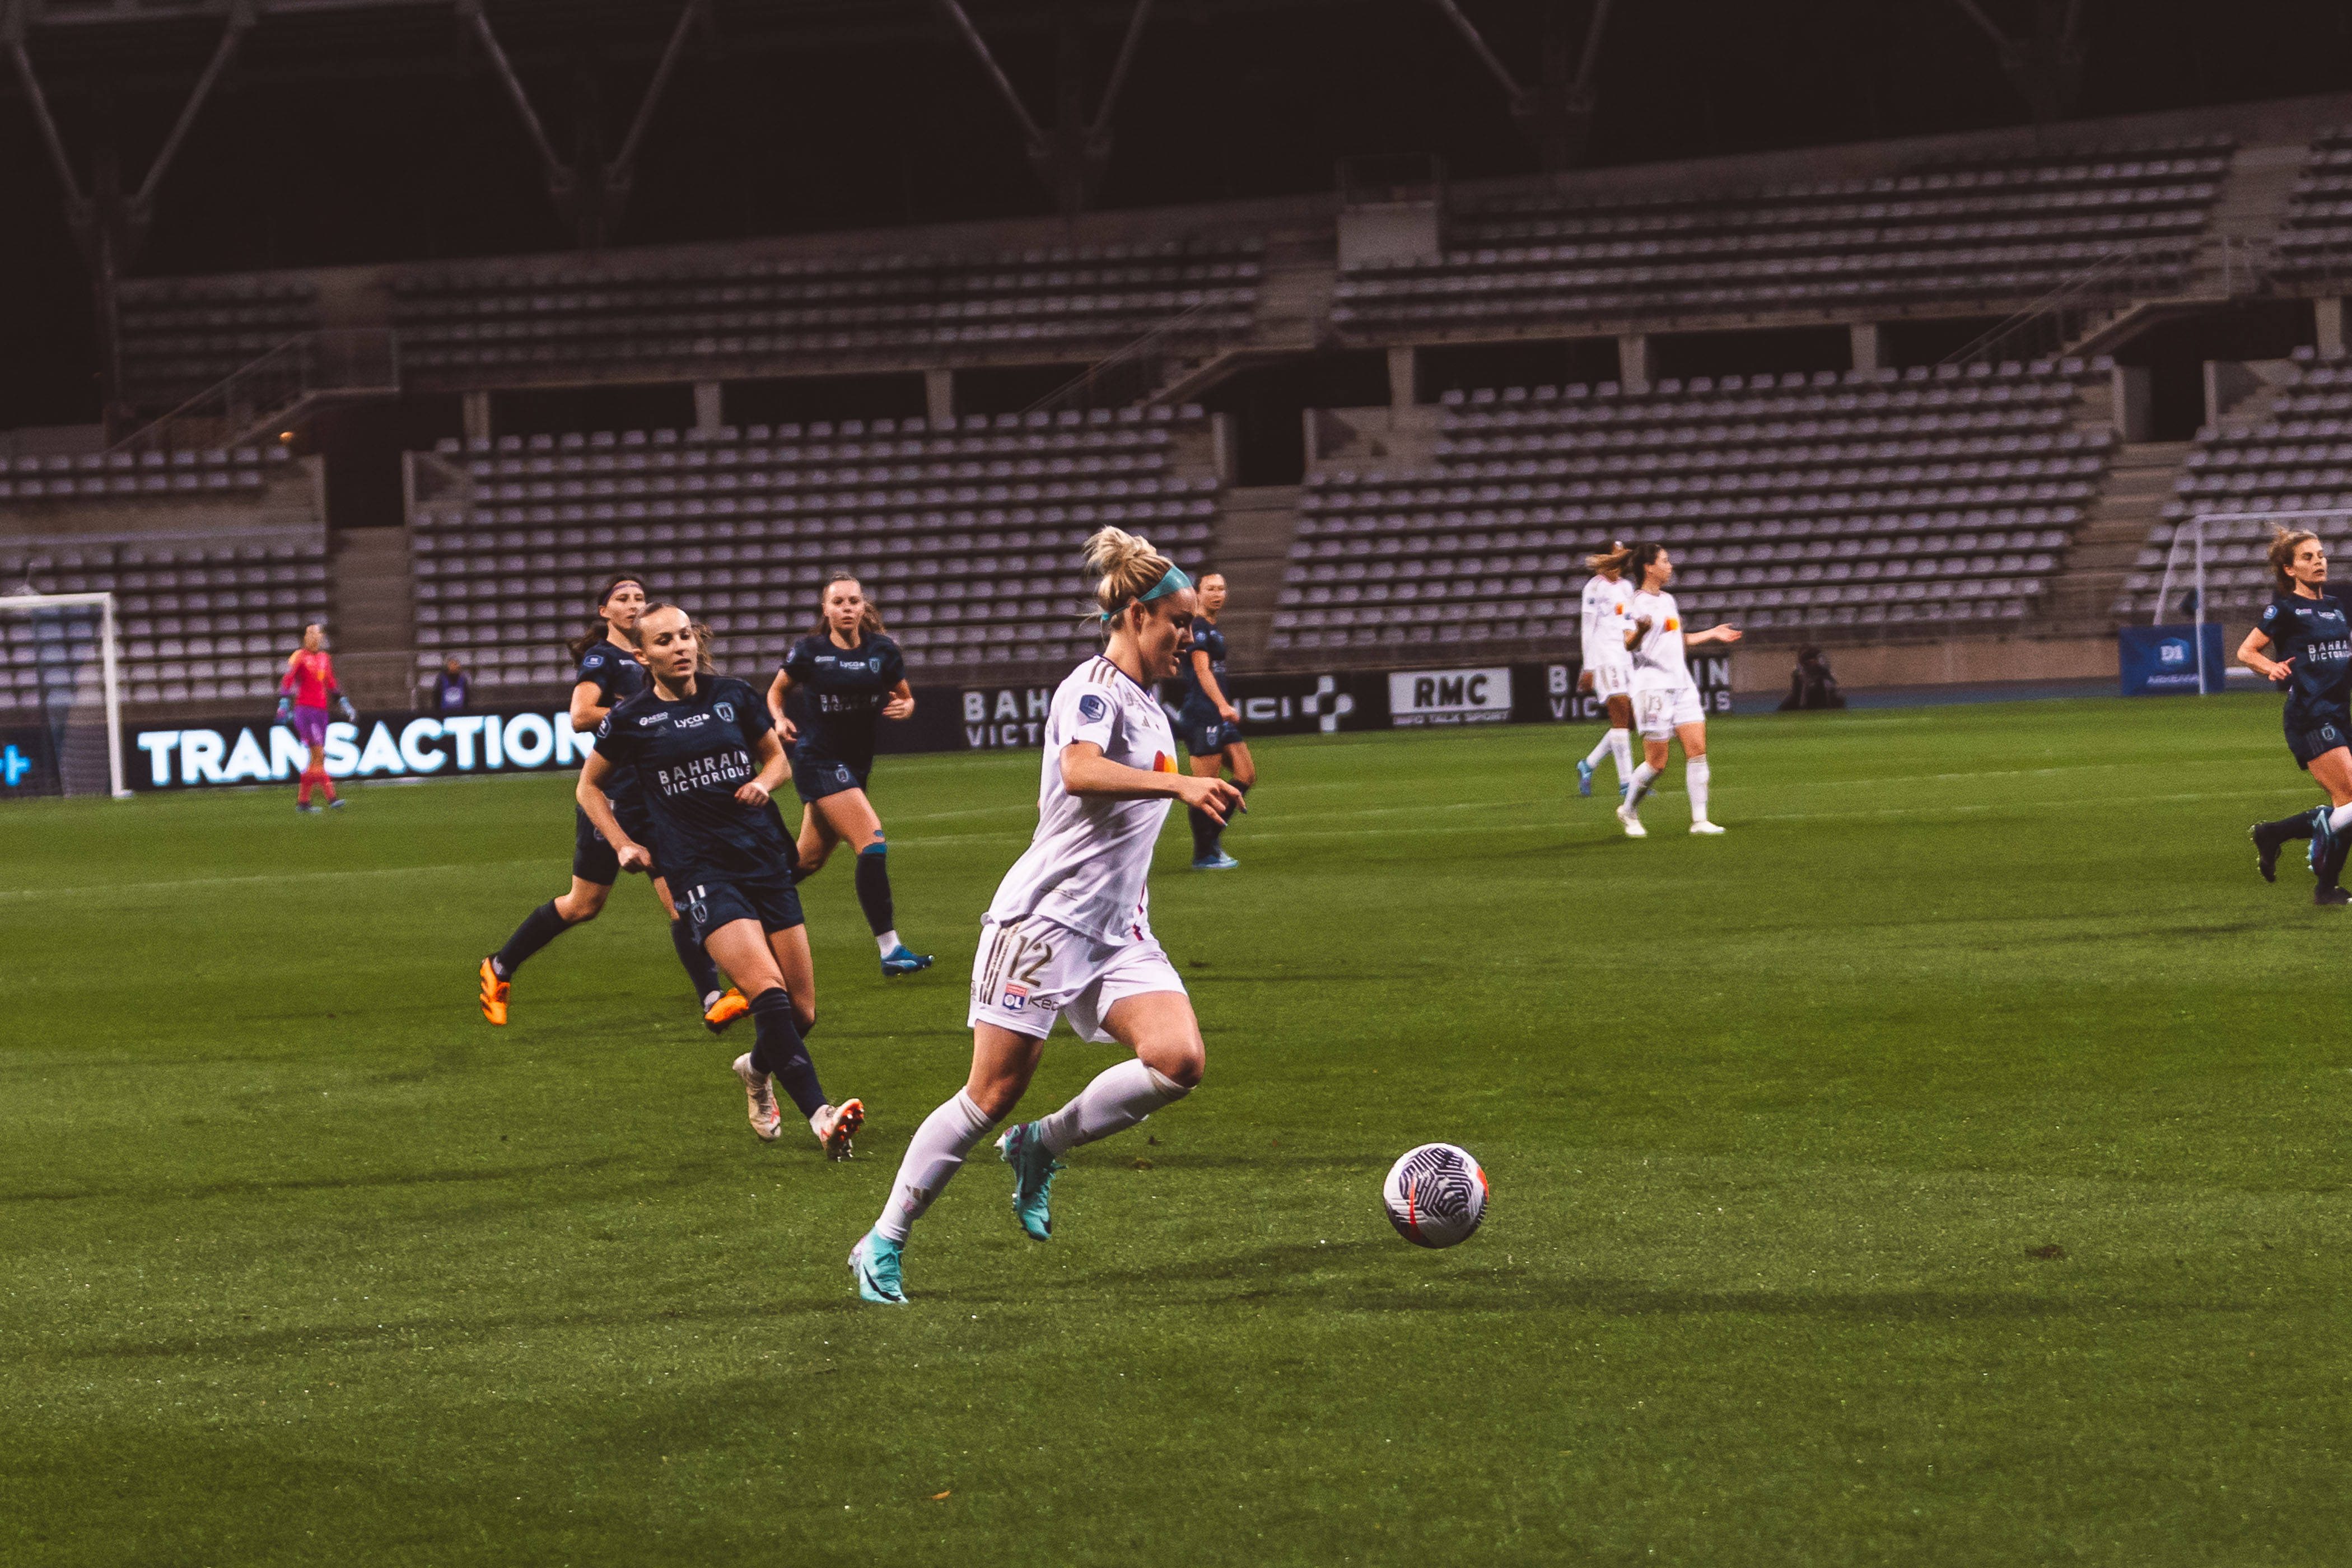 Ellie Carpenter (12) from OL in action during D1 Arkema game between Paris FC and Olympique Lyonnais at Stade Charlety in Paris, France. (Pauline FIGUET / SPP)